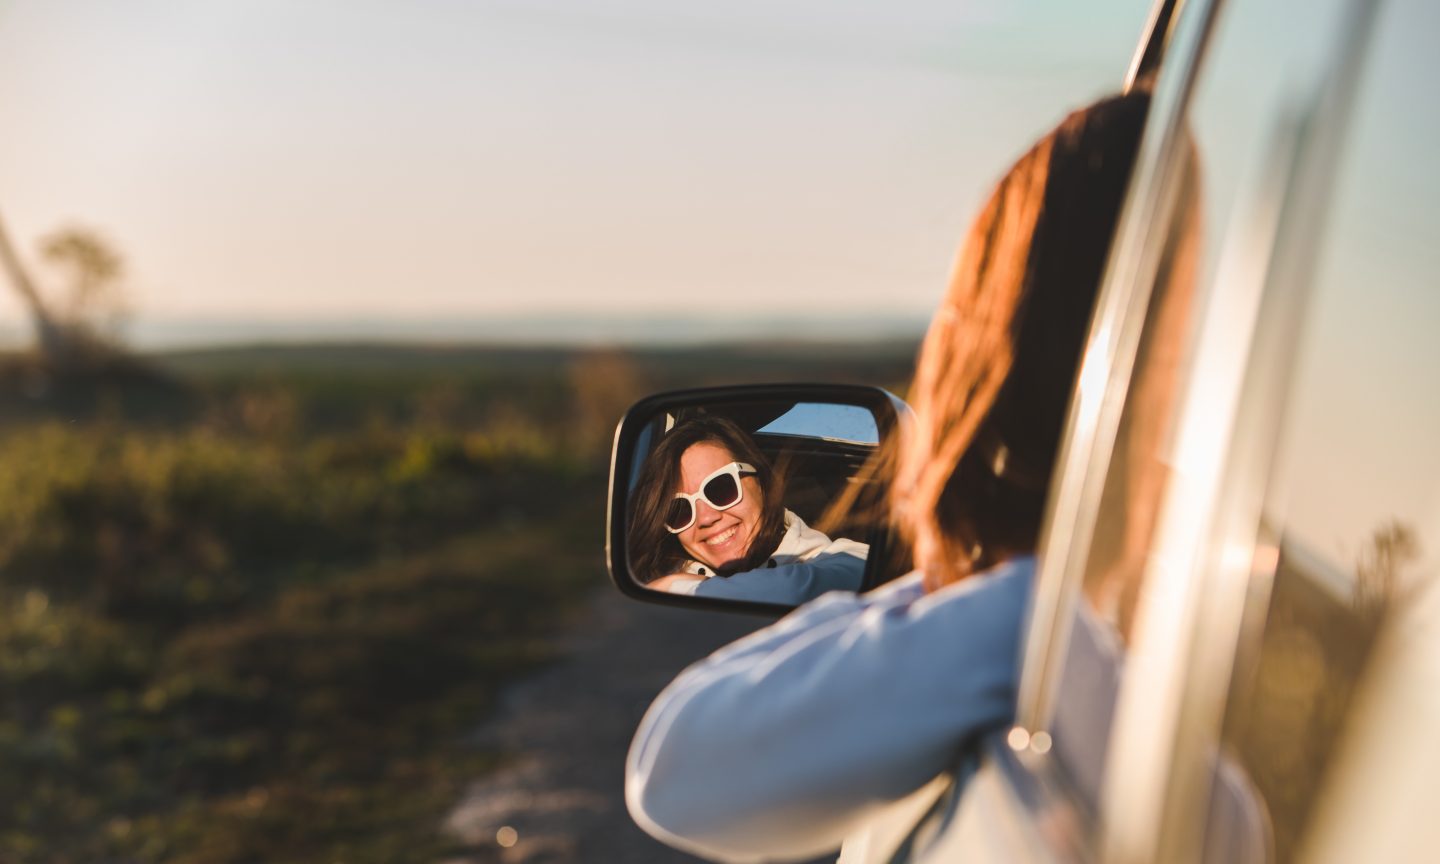 Safeco Auto Insurance Review 2022: Pros and Cons - NerdWallet